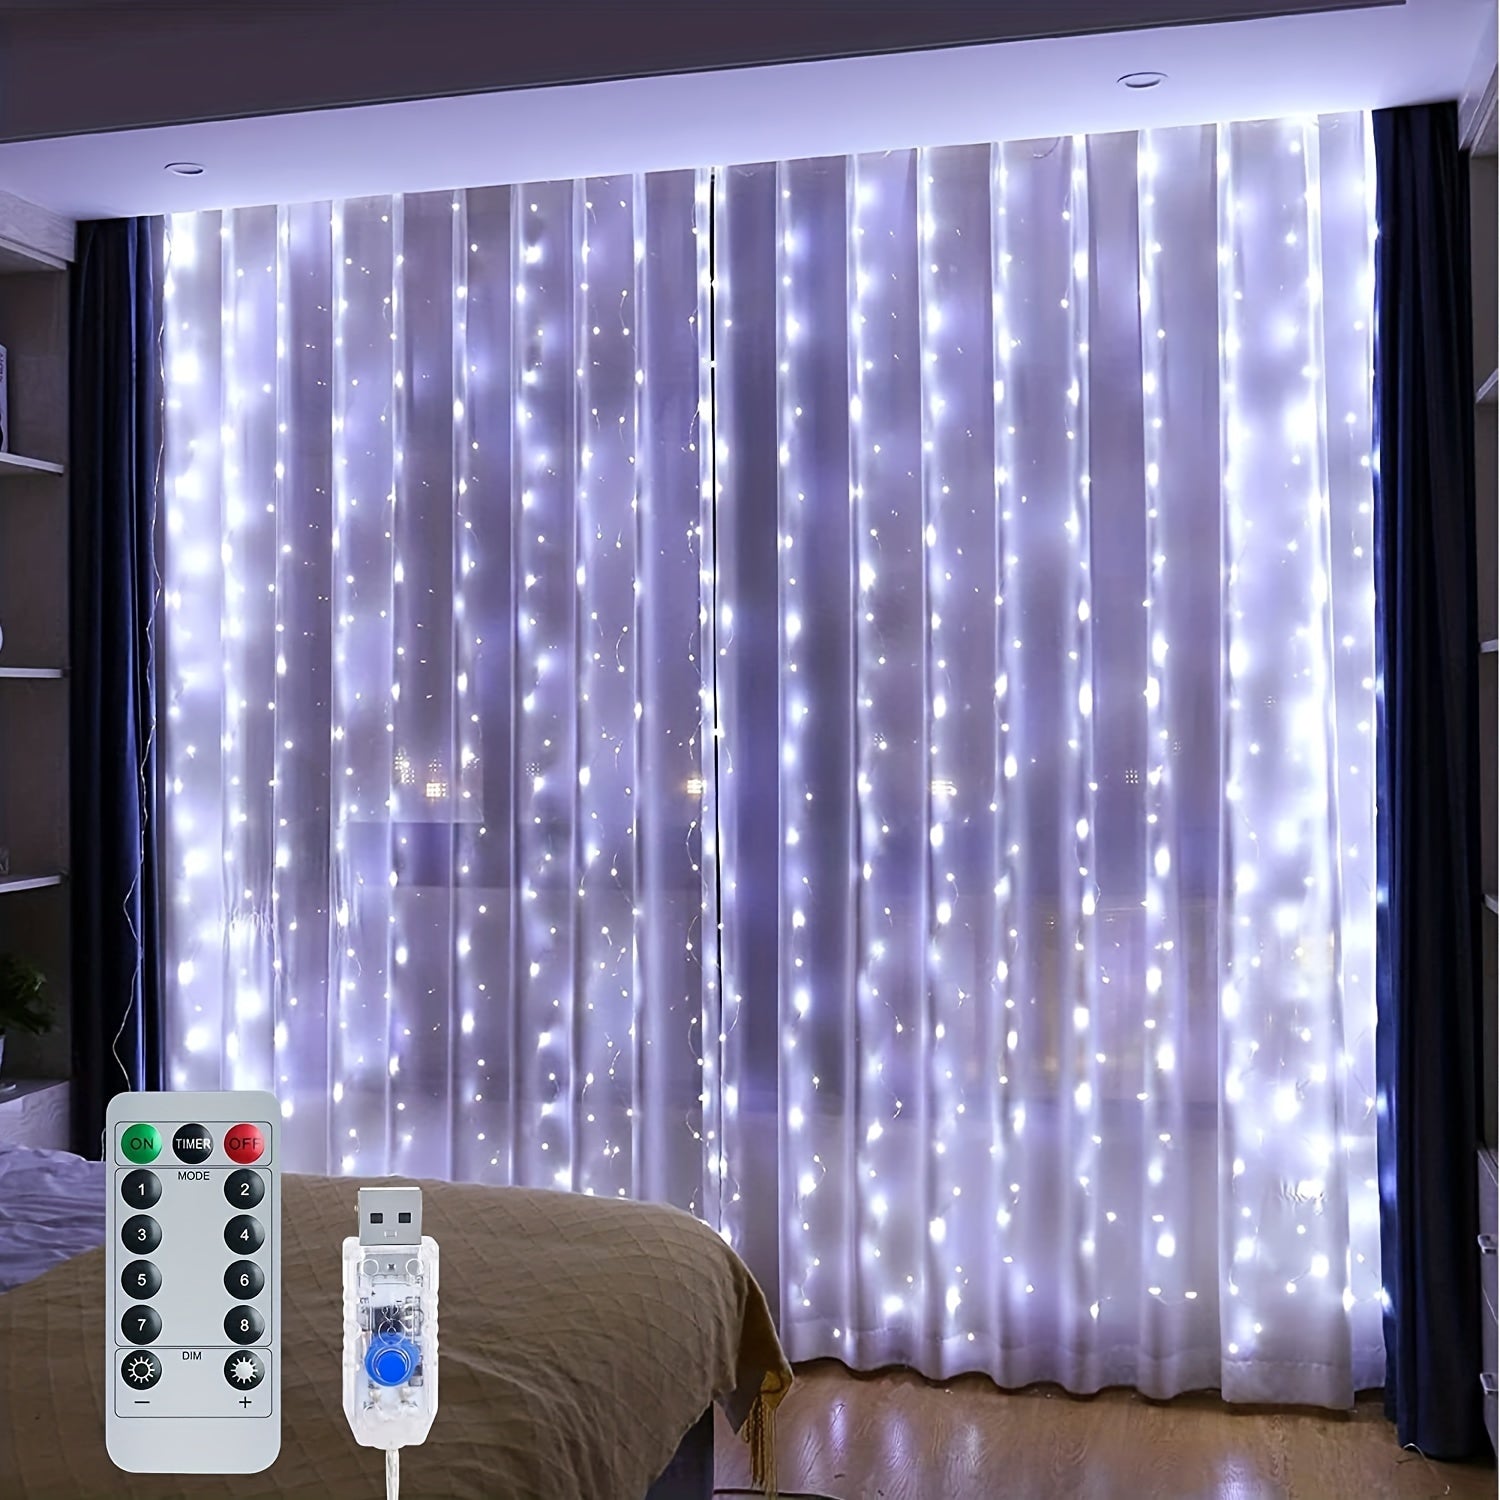 1pc, String Lights Curtain, USB Powered Fairy Lights For Party Bedroom Wall, 8 Lighting Modes Waterproof Ideal For Wedding Valentines Day Decor